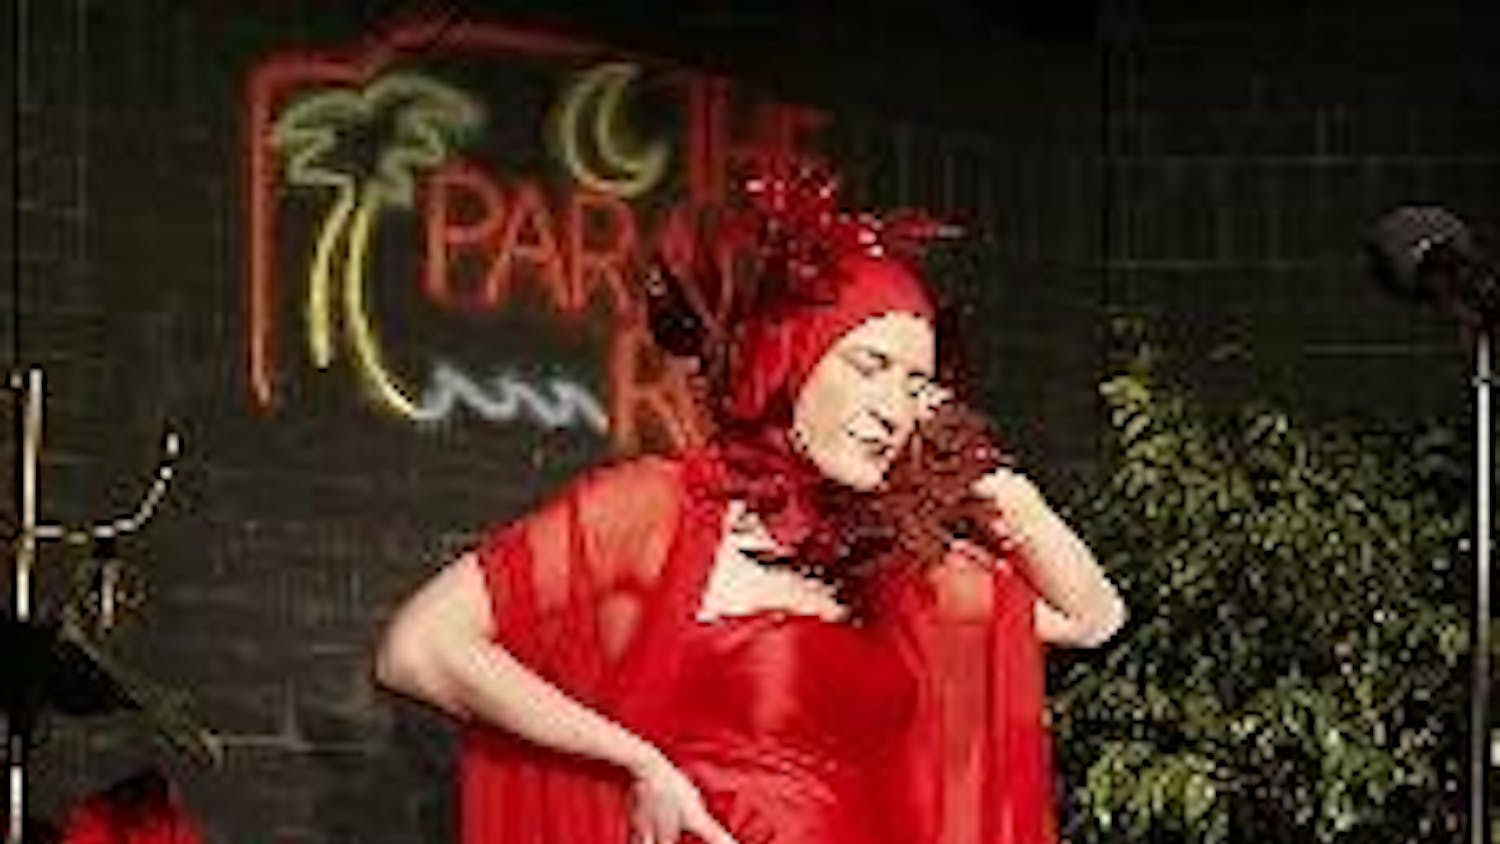 GARDEN PARTY - Local theater group Ganymede Arts brings the cult hit "Grey Gardens," a documentary of Jacqueline Bouvier Kennedy Onassis' cousin "Little Edie,"  to new life as the play, "After the Garden: Edith Beale Live at Reno Sweeney." The backroom of